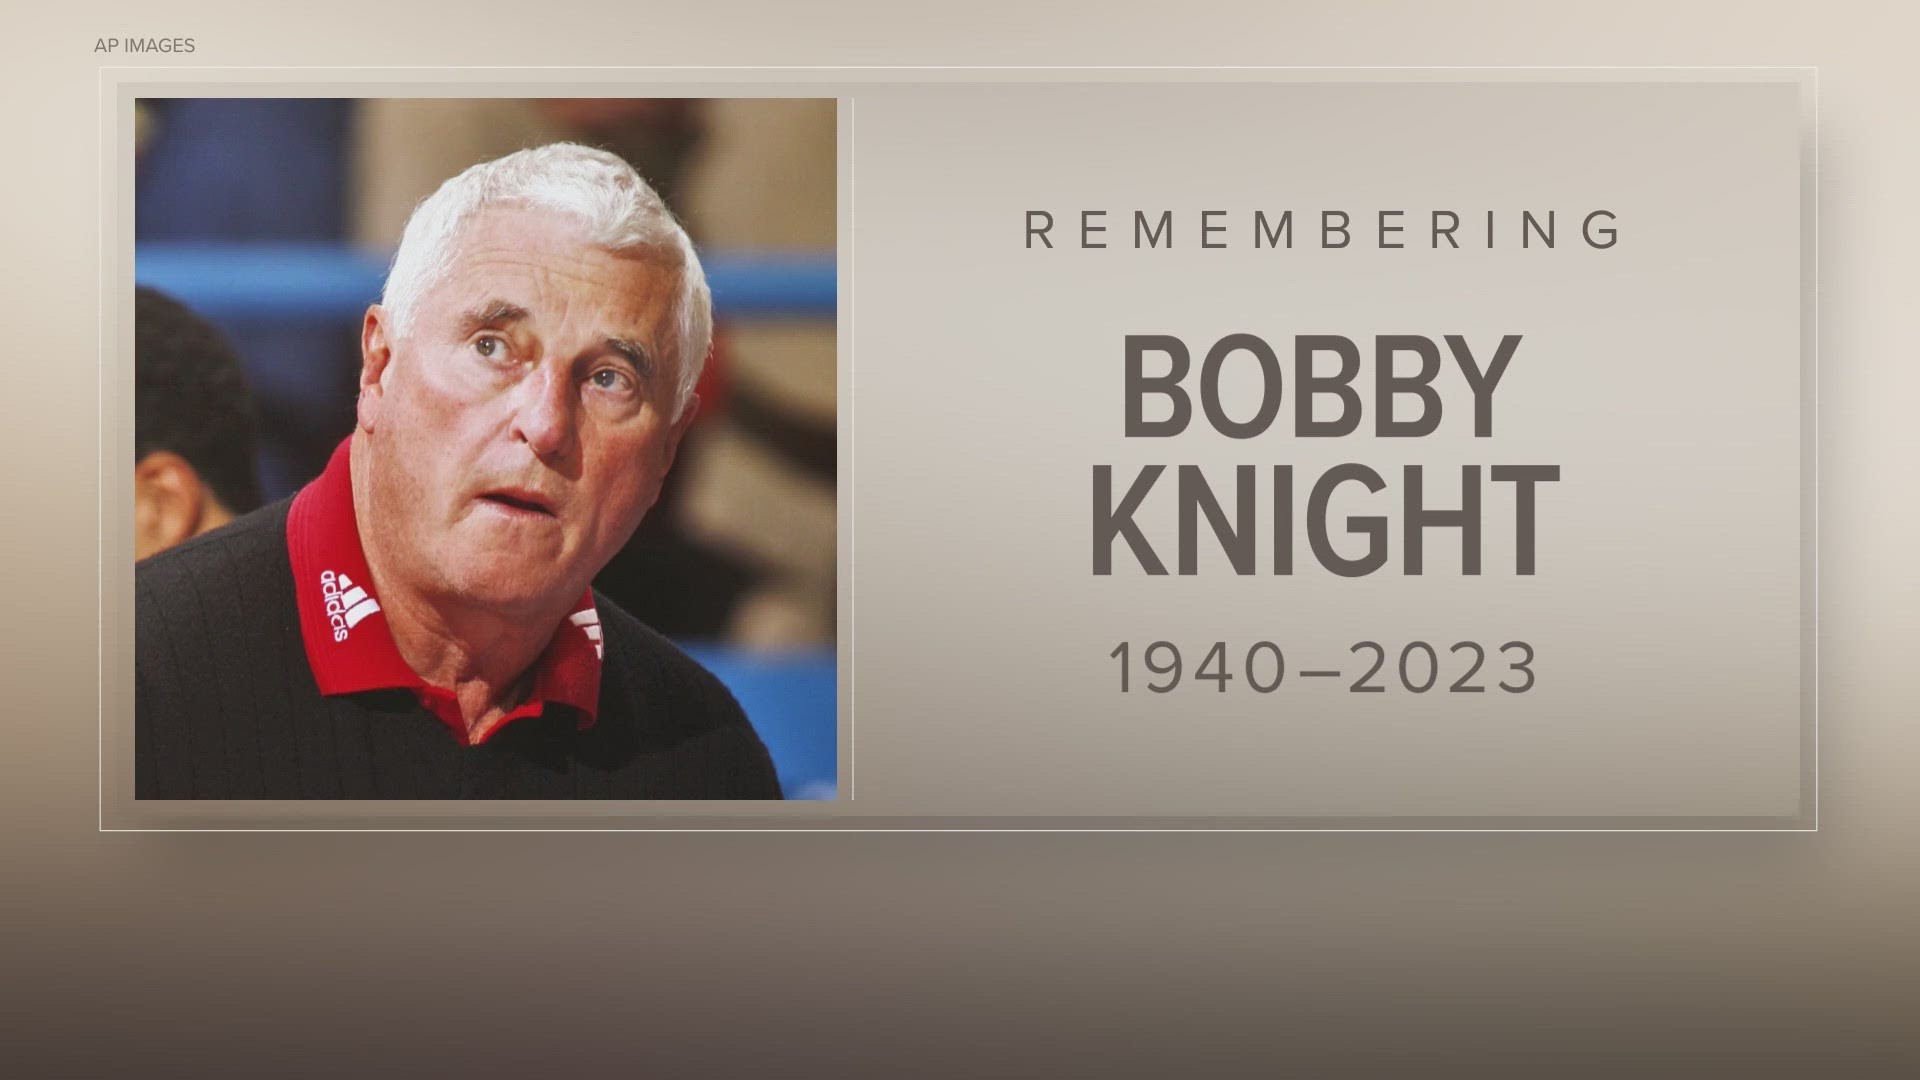 Bob Knight is being remembered for the indelible mark he left on Indiana University.